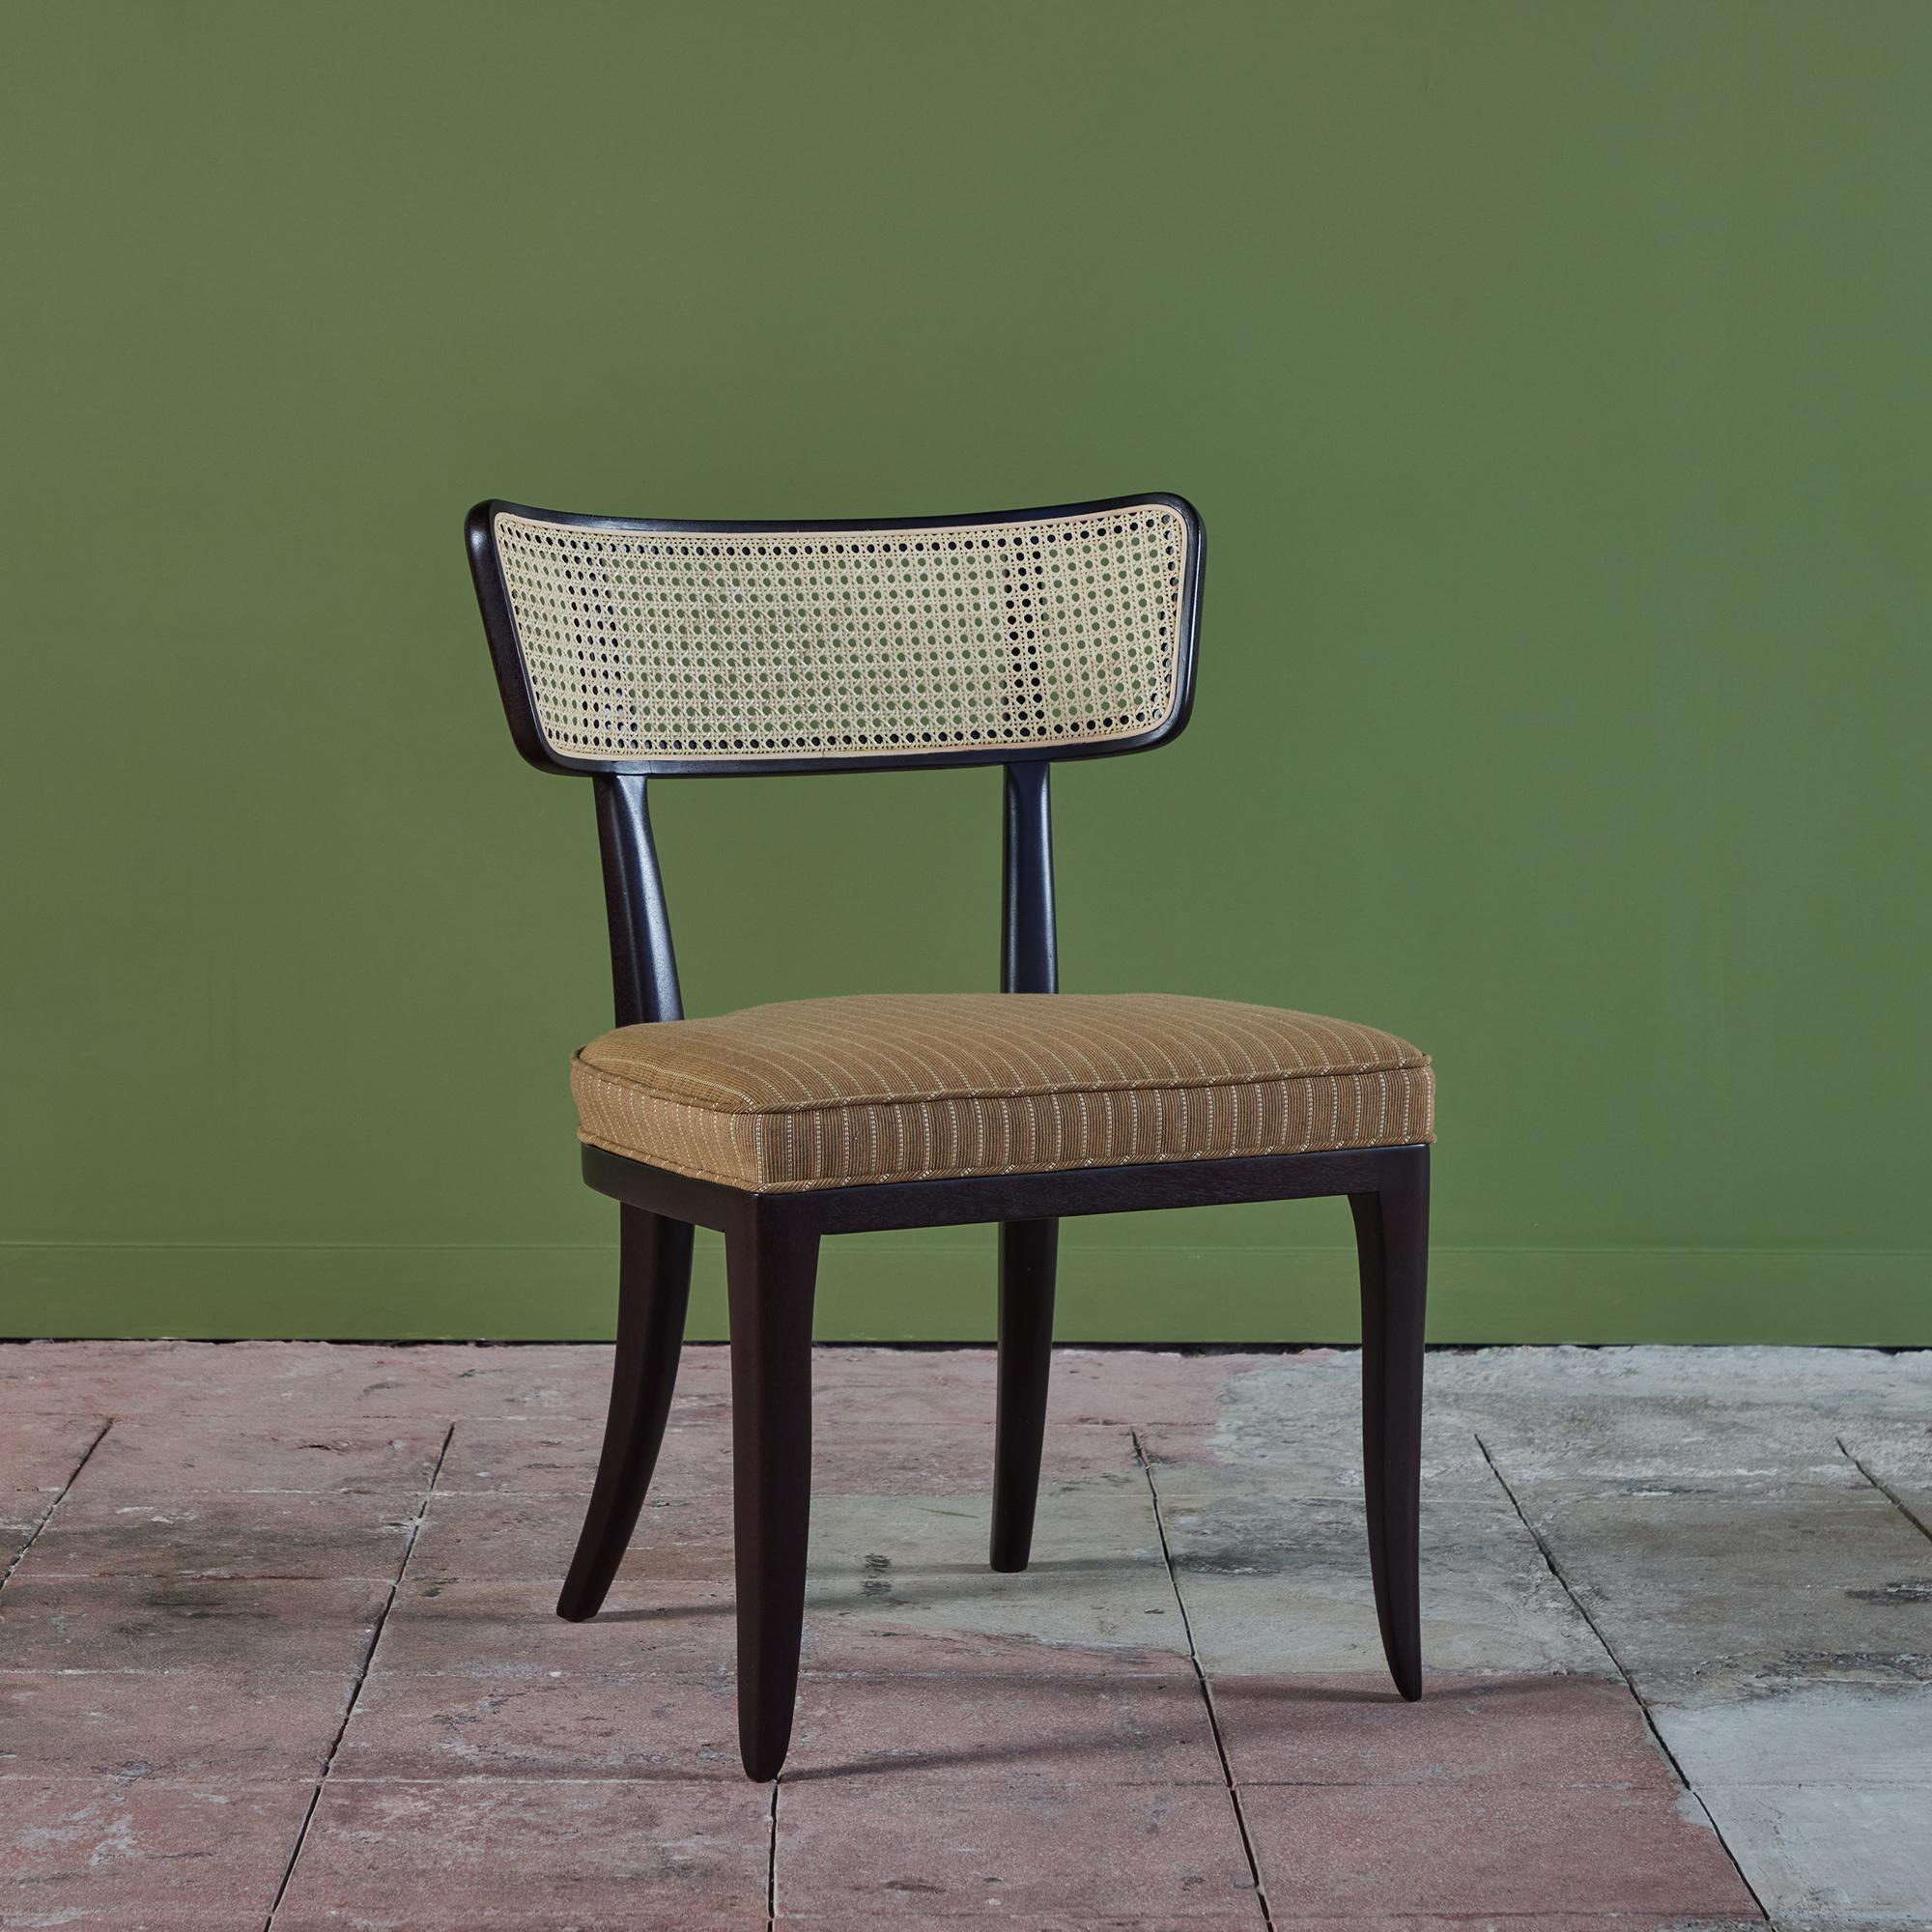 A mahogany ebonized side chair by Edward Wormley for Dunbar, USA, c.1960s. The backrest has been newly caned with a newly upholstered seat cushion. Retains Dunbar brass label.

Edward Wormley was a longtime director of design for the Dunbar